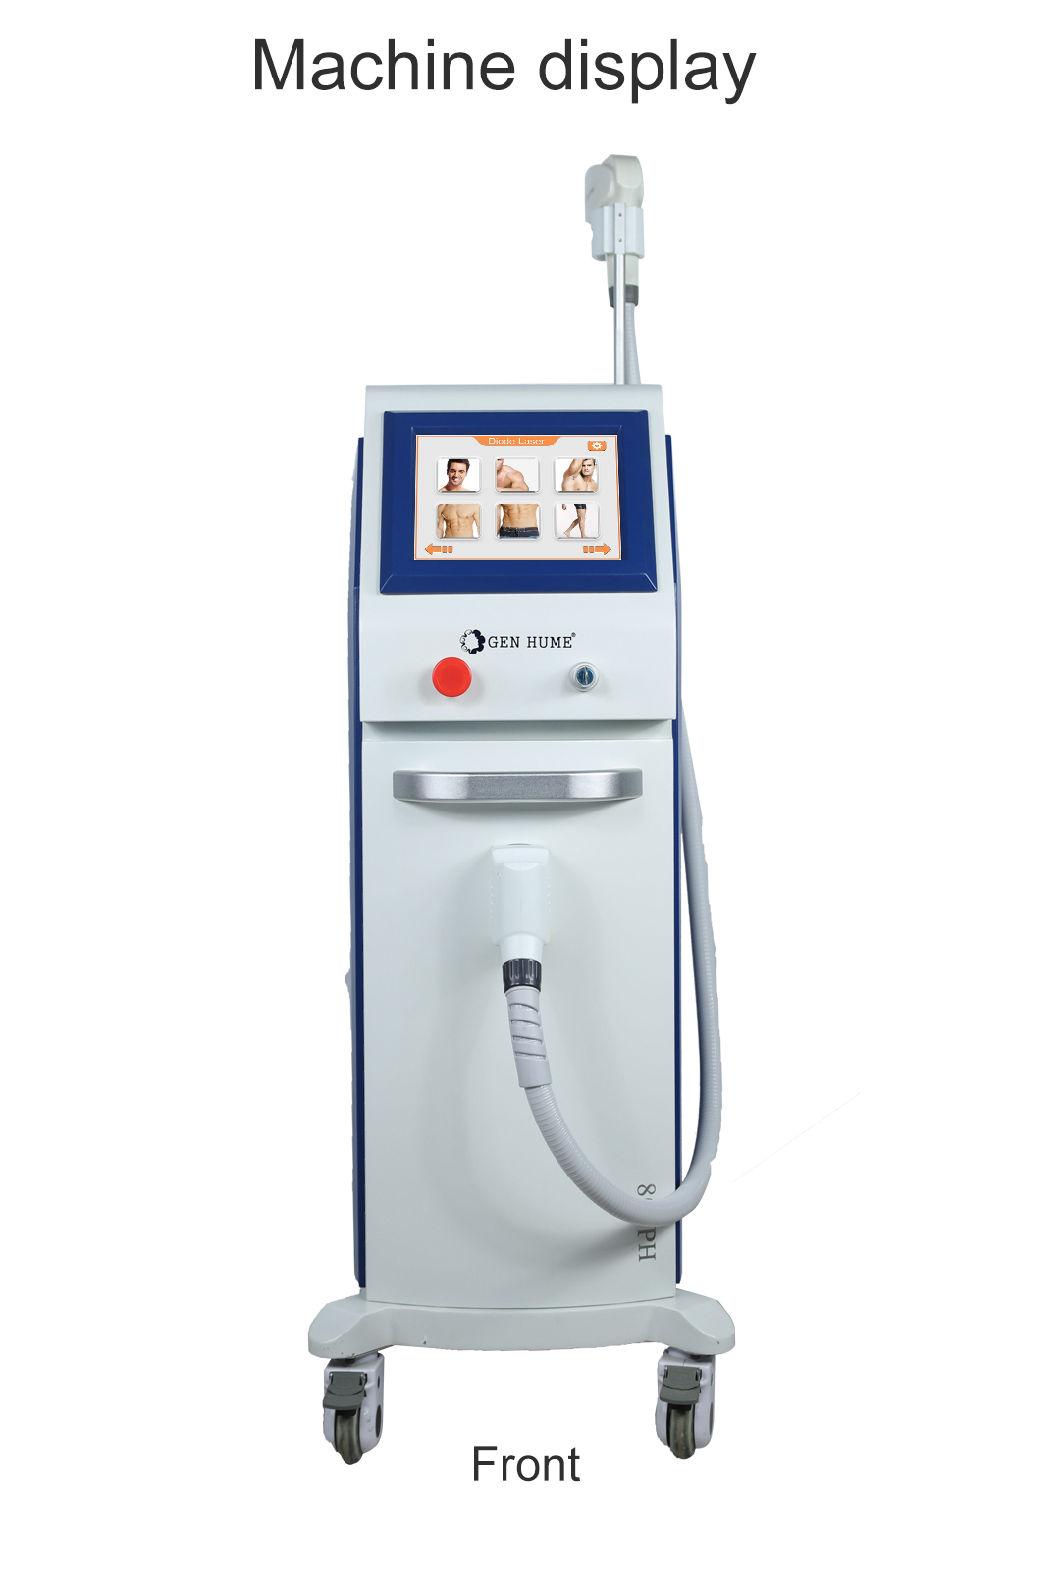 Effective Best Quality Manufacturer China Beauty Equipment Salon 808nm Diode Laser for Permanent Hair Removal Beauty Machine